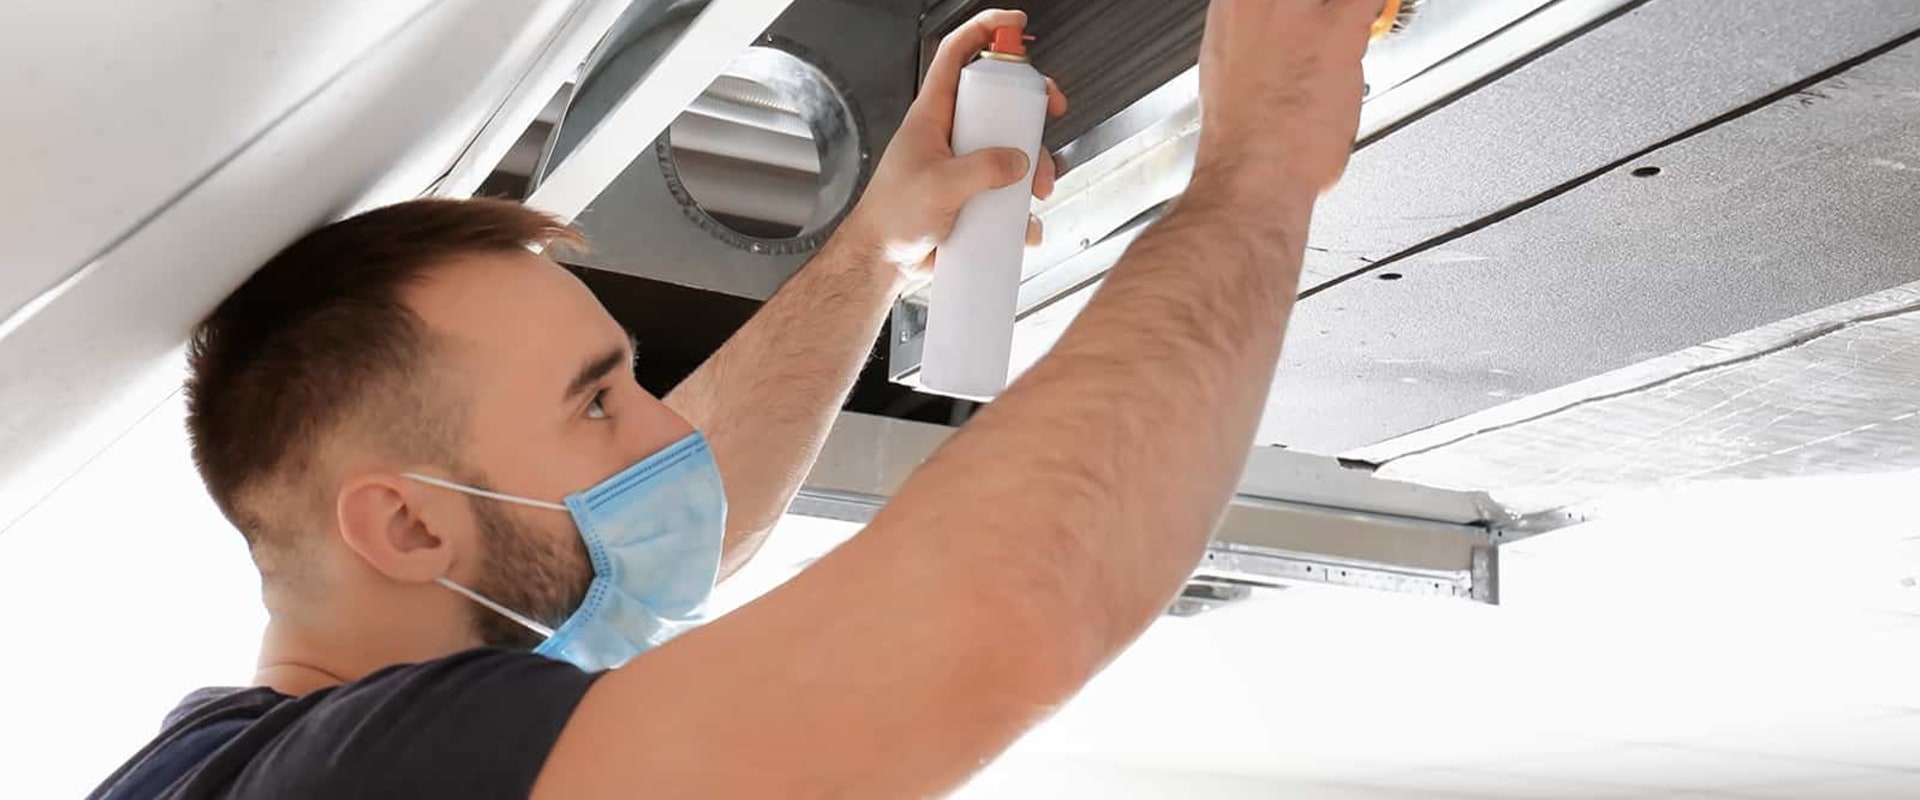 Do You Need Professional Air Duct Cleaning Services?